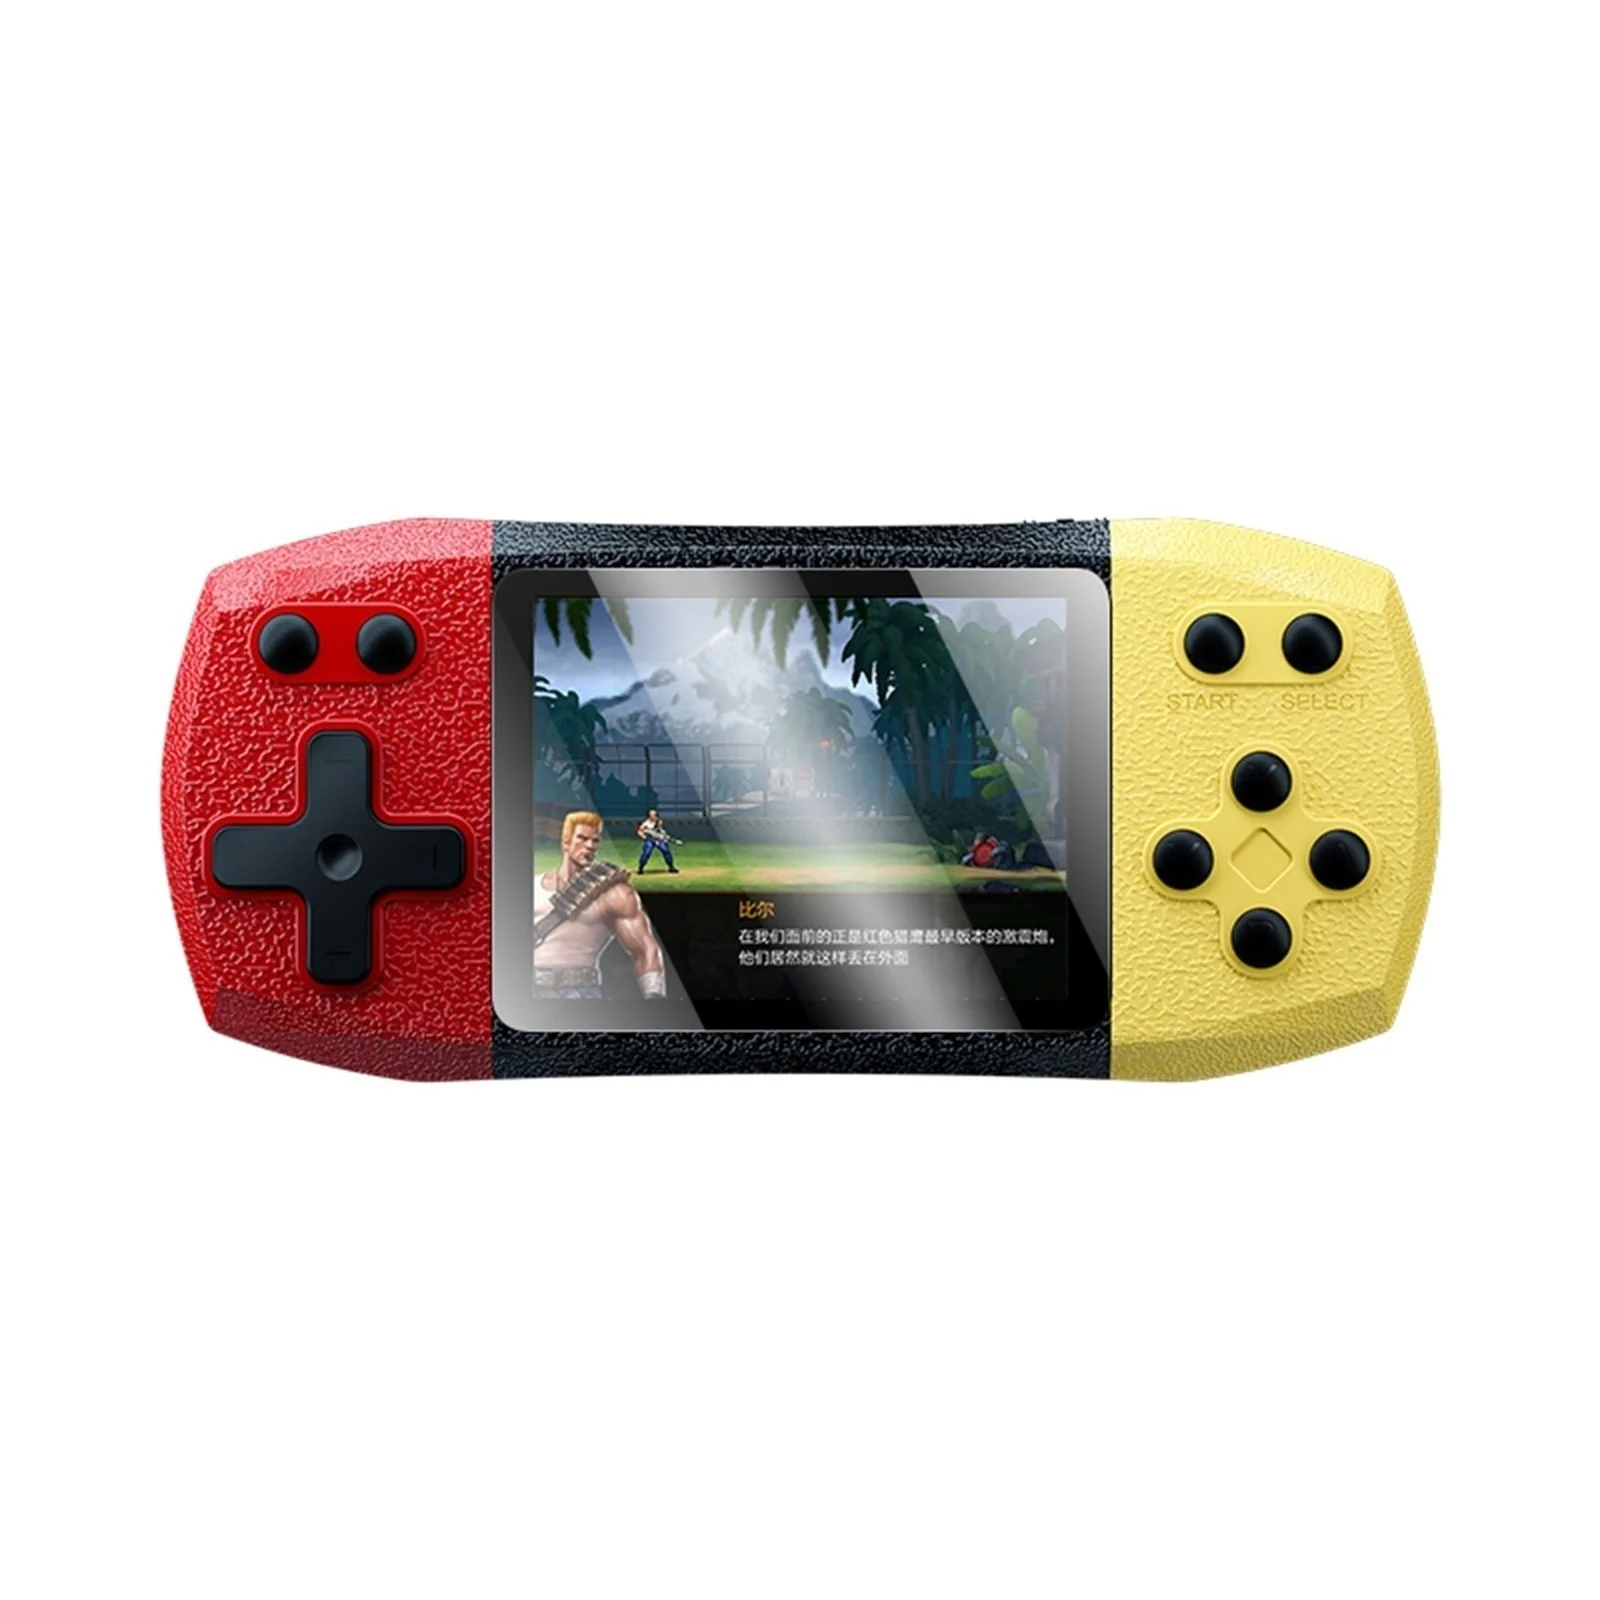 

2022 Classic Childhood Portable Game Console 3.0 Inch Color Screen Retro Handheld Game 620 Games Handheld Game Console Sale Best